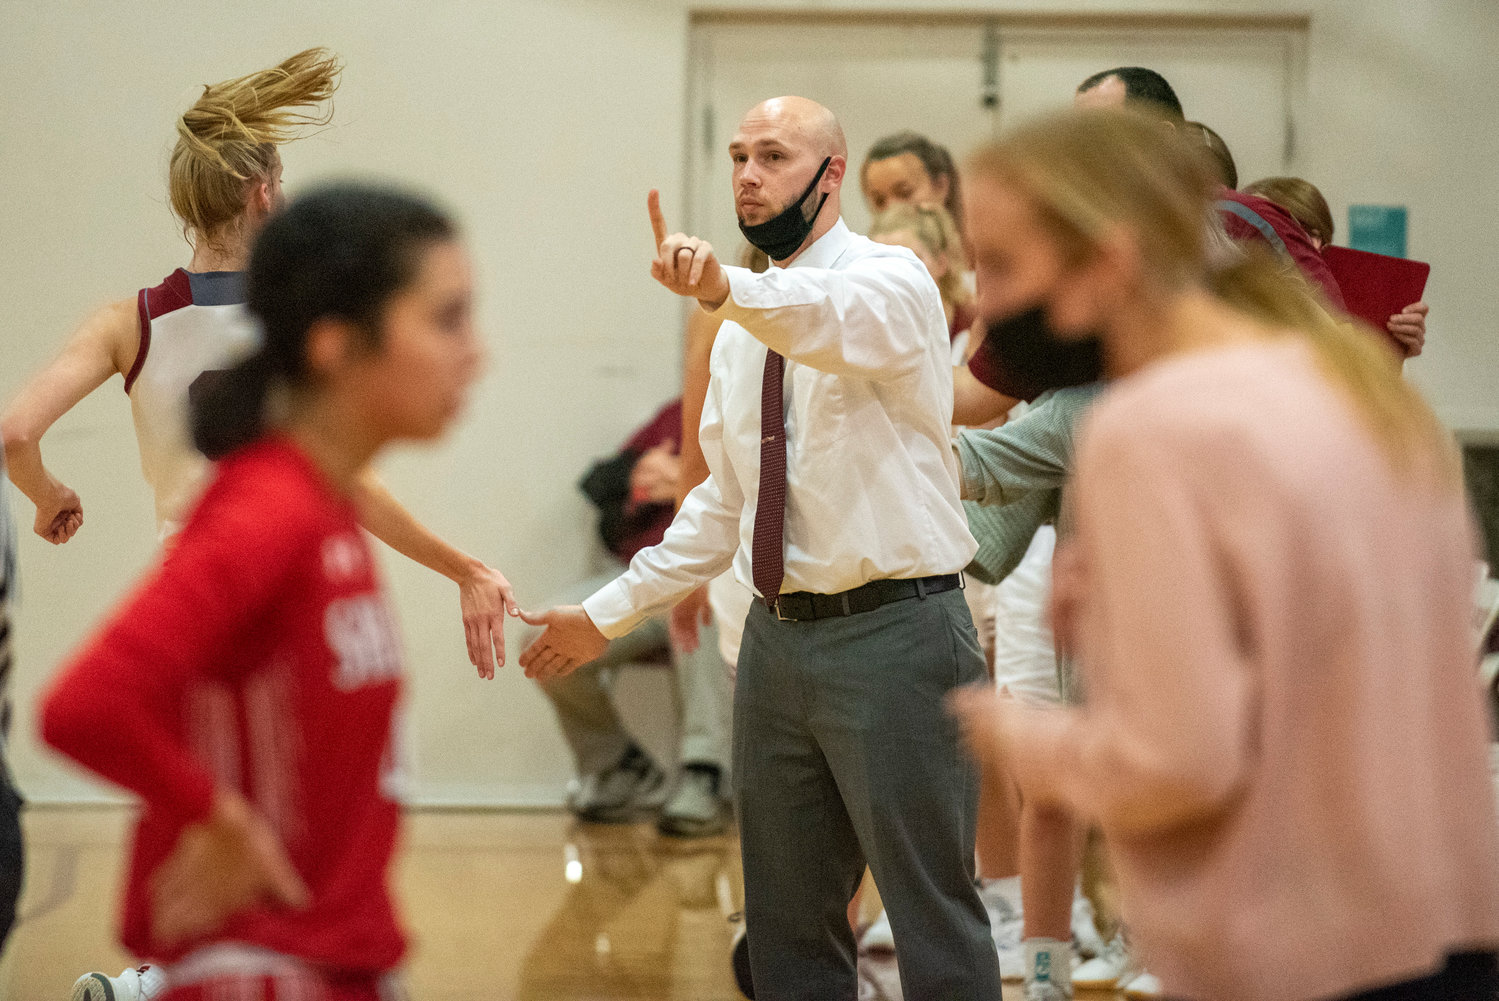 W.F. West coach Kyle Karnofski calls out instructions to his team during a home game against Shelton on Dec. 7.